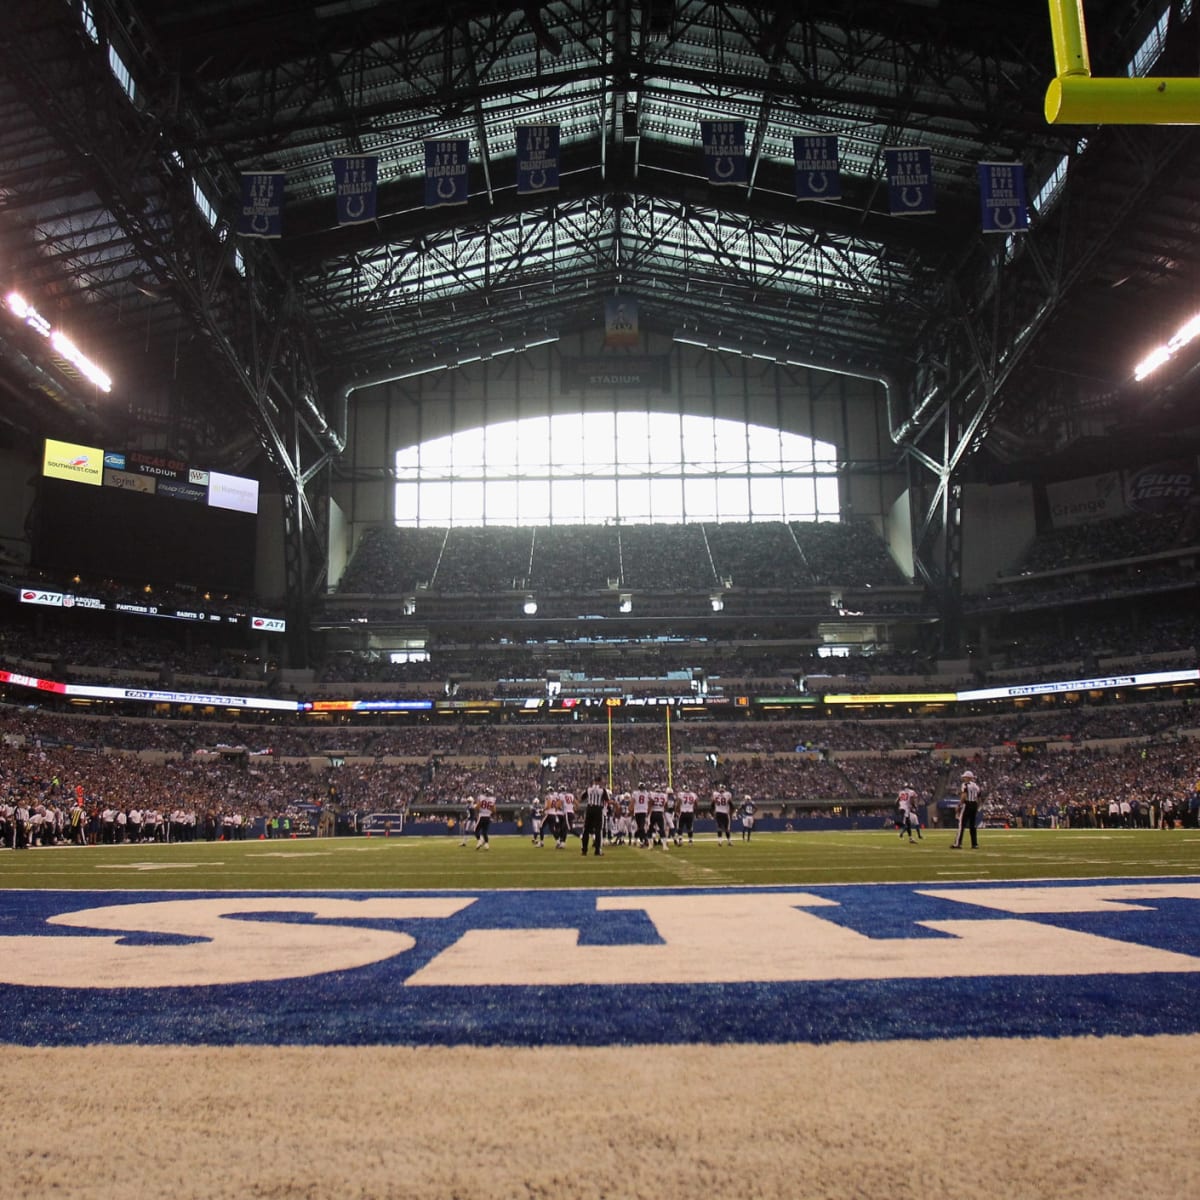 Indianapolis Colts 2020: Attendance guidelines for Lucas Oil Stadium